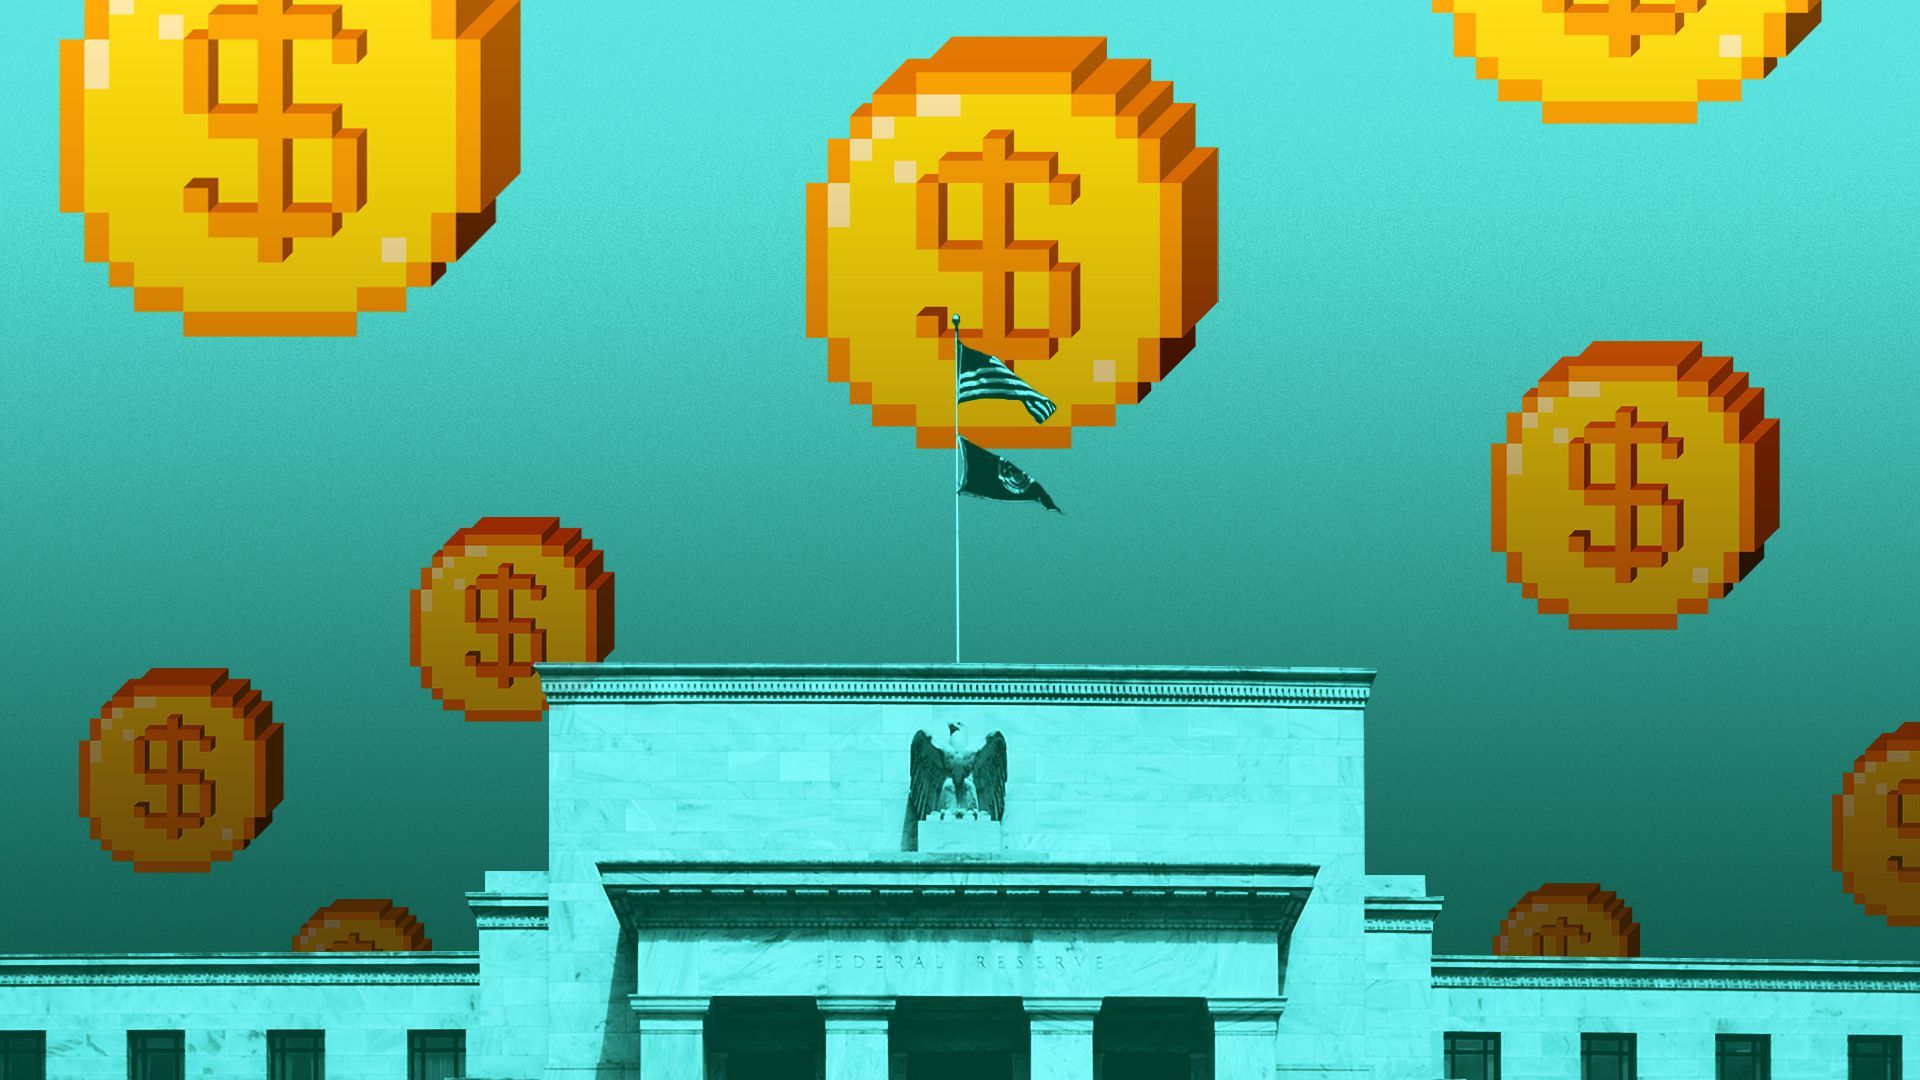 Illustration of the Marriner S. Eccles Federal Reserve Board Building against a backdrop of pixelated coins.